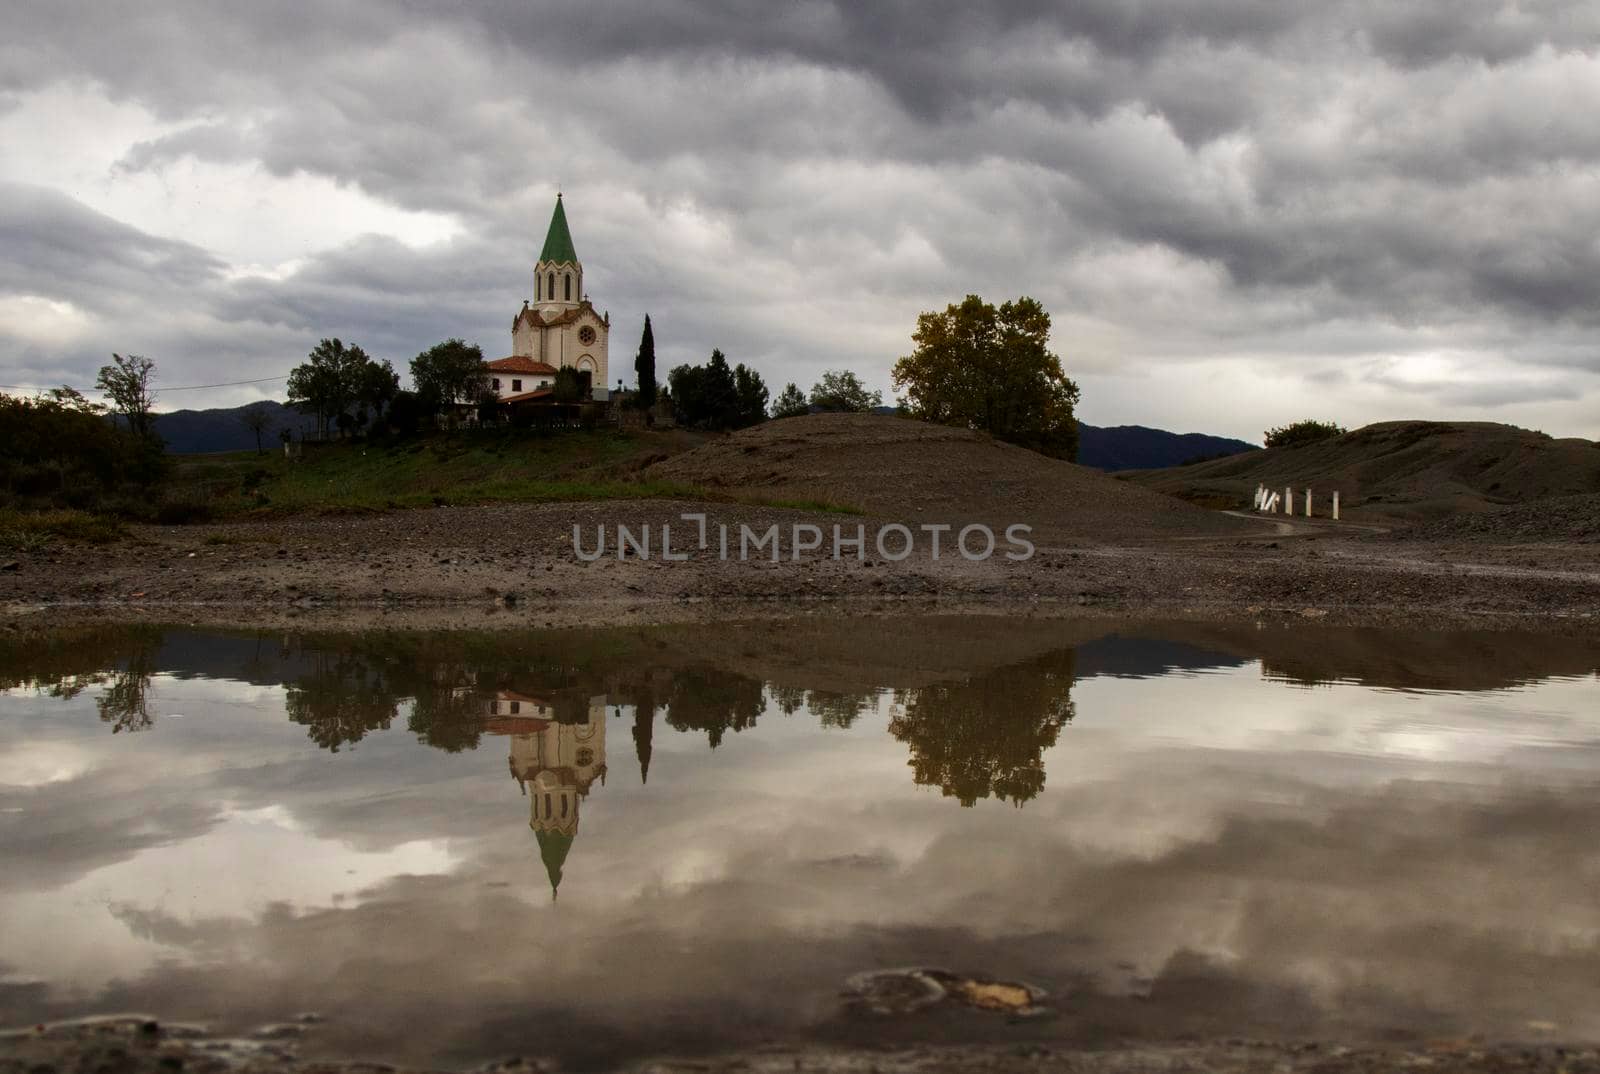 Landscape showing Puig Agut church and some trees under a cloudy sky and its reflection on a puddle